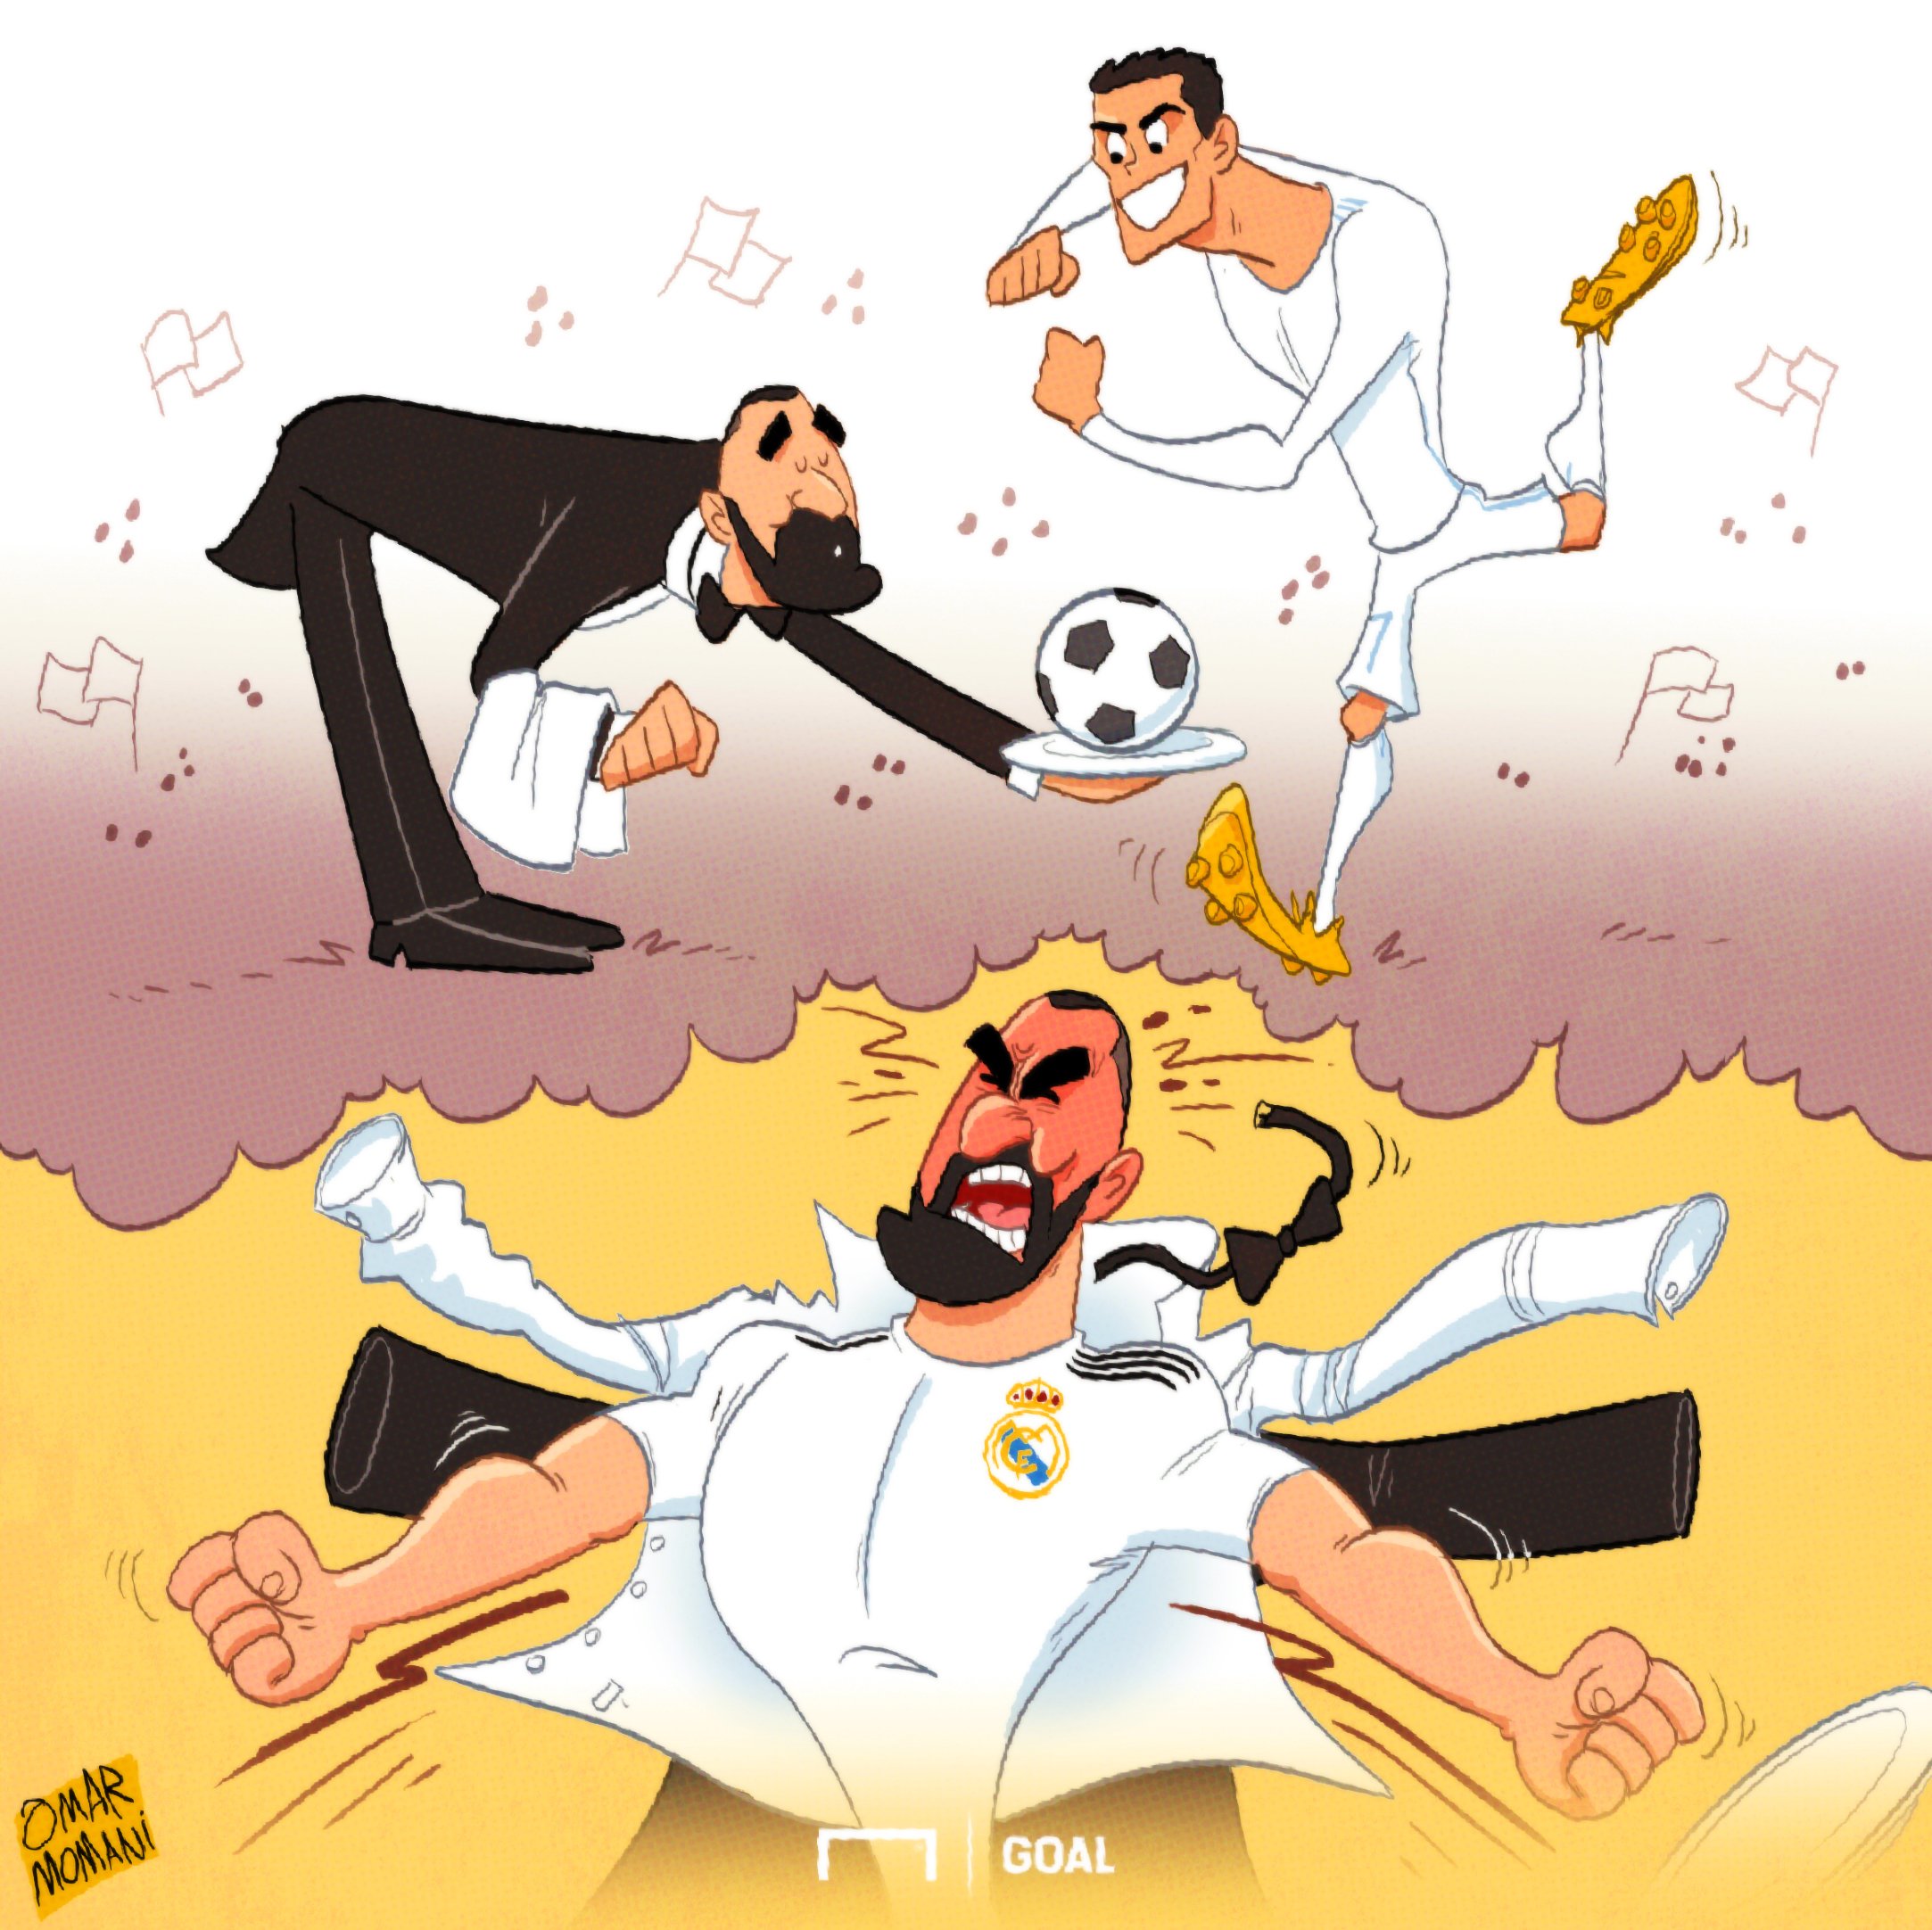 Omar Momani on Twitter: "Benzema: “I played to help Cristiano. Now though,  I'm the leader of the attack. It's up to me to make the difference" بينزما:  كنت العب لمساعدة كريستيانو، الان